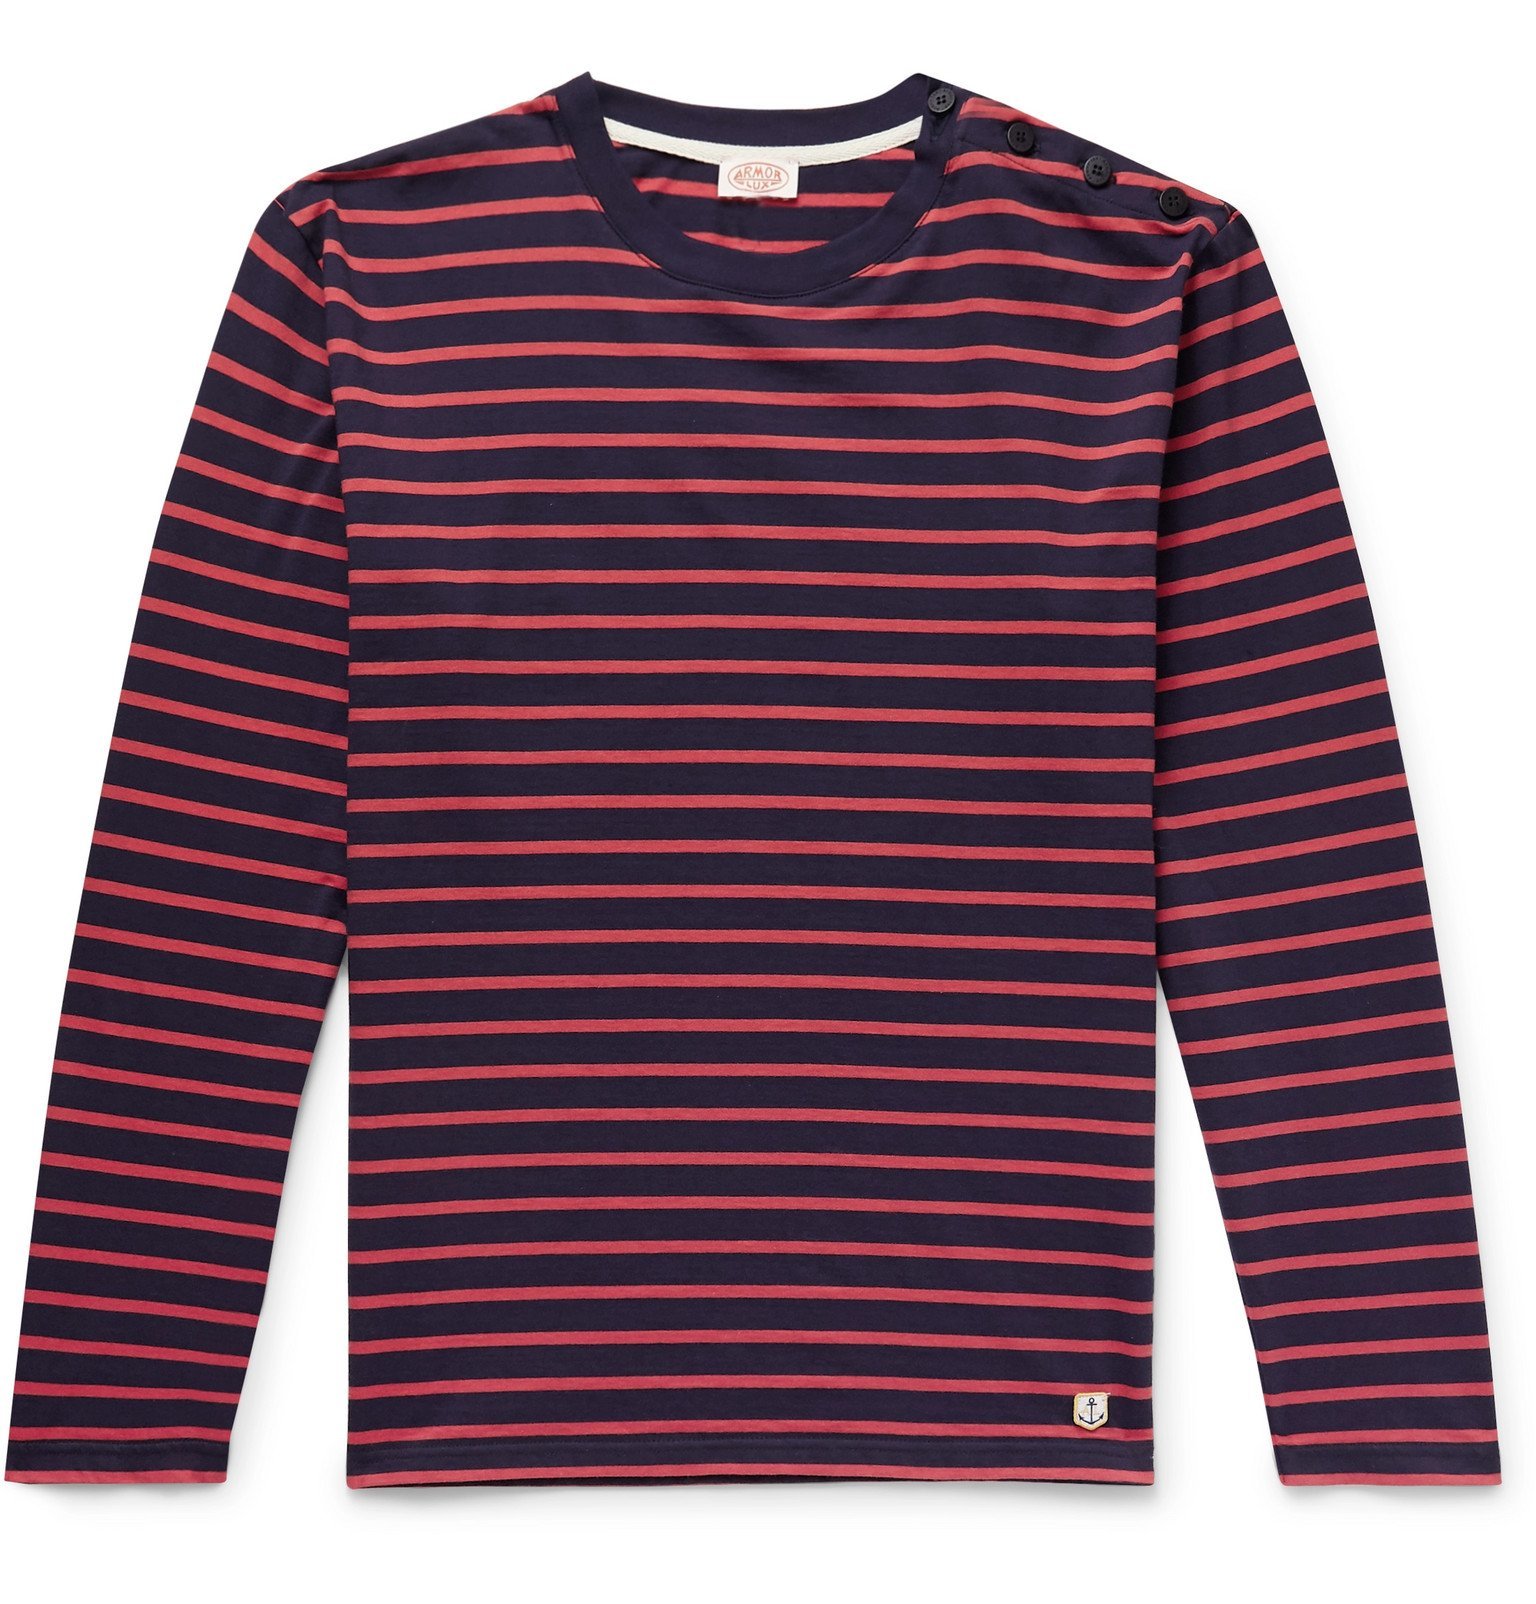 Armor Lux - Striped Cotton T-Shirt - Red Armor Lux